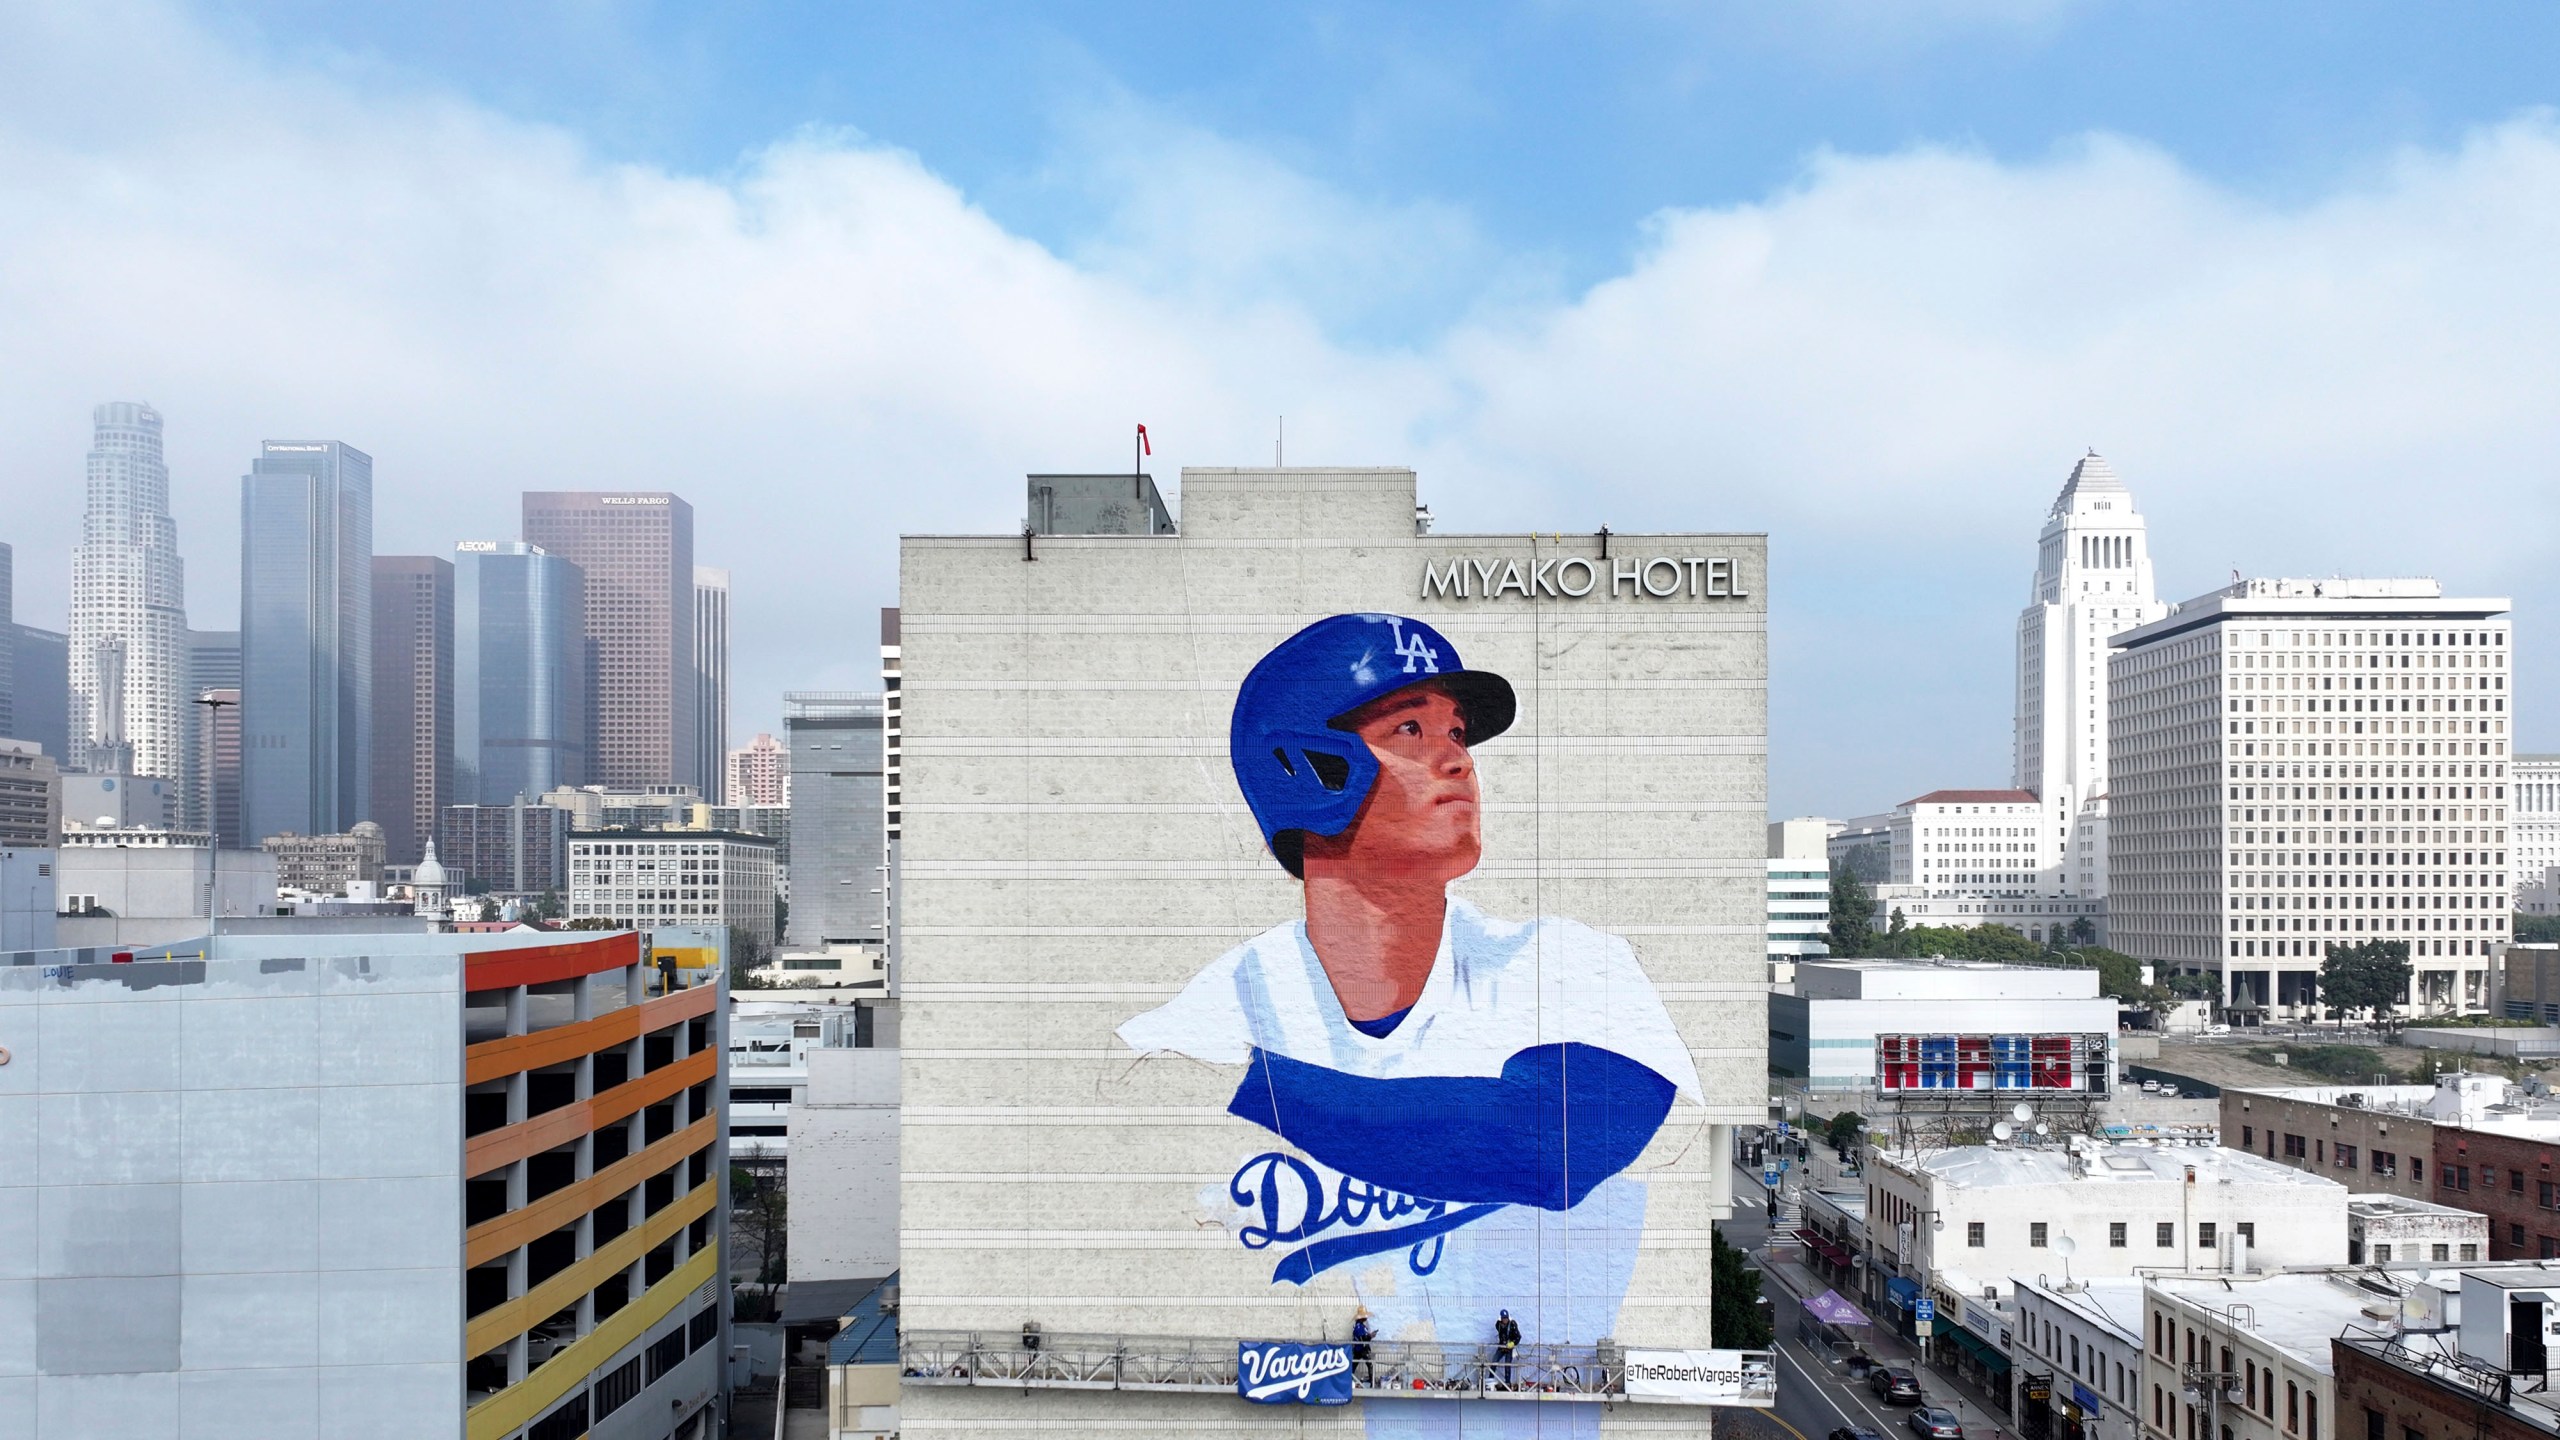 Muralist Robert Vargas, center, works on a new Los Angeles Dodgers baseball player Shohei Ohtani mural titled "L.A. Rising," Wednesday, March 20, 2024, on the Miyako Hotel in the Little Tokyo area of Los Angeles. (Dean Musgrove/The Orange County Register via AP)